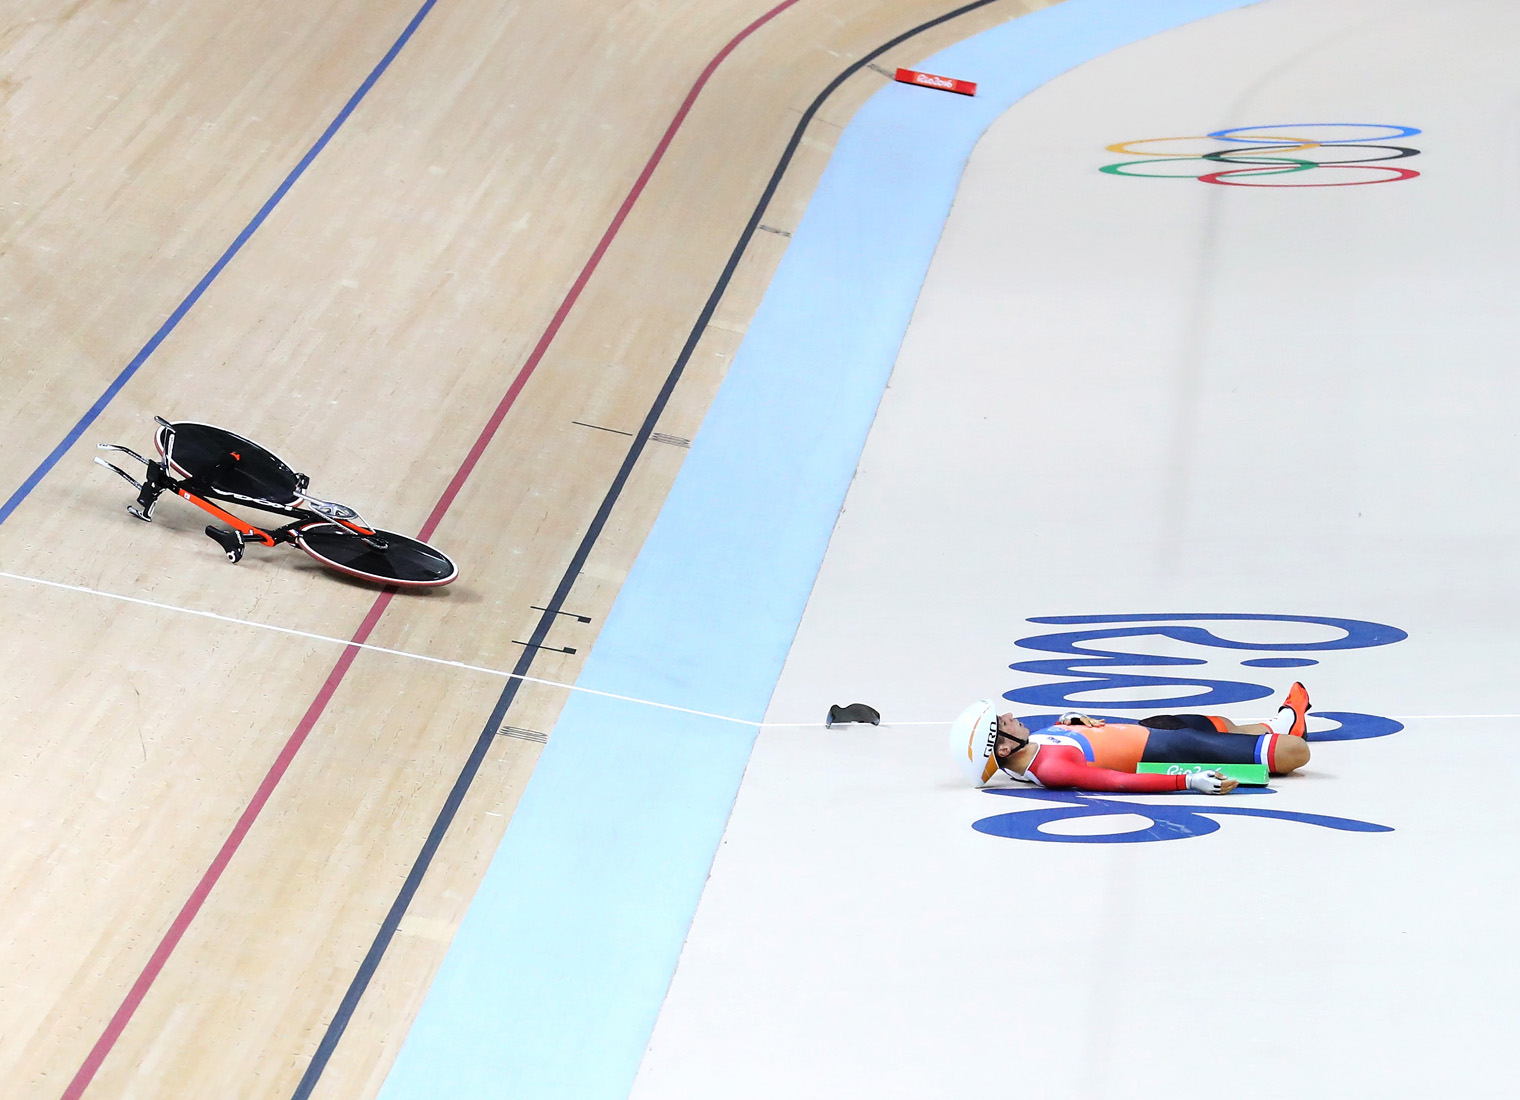 RIO DE JANEIRO, BRAZIL - AUGUST 11: Joost van der Burg of Netherlands crashes in the Men's Team Pursuit Track Cycling Qualifying on Day 6 of the 2016 Rio Olympics at Rio Olympic Velodrome on August 11, 2016 in Rio de Janeiro, Brazil. (Photo by Ryan Pierse/Getty Images)